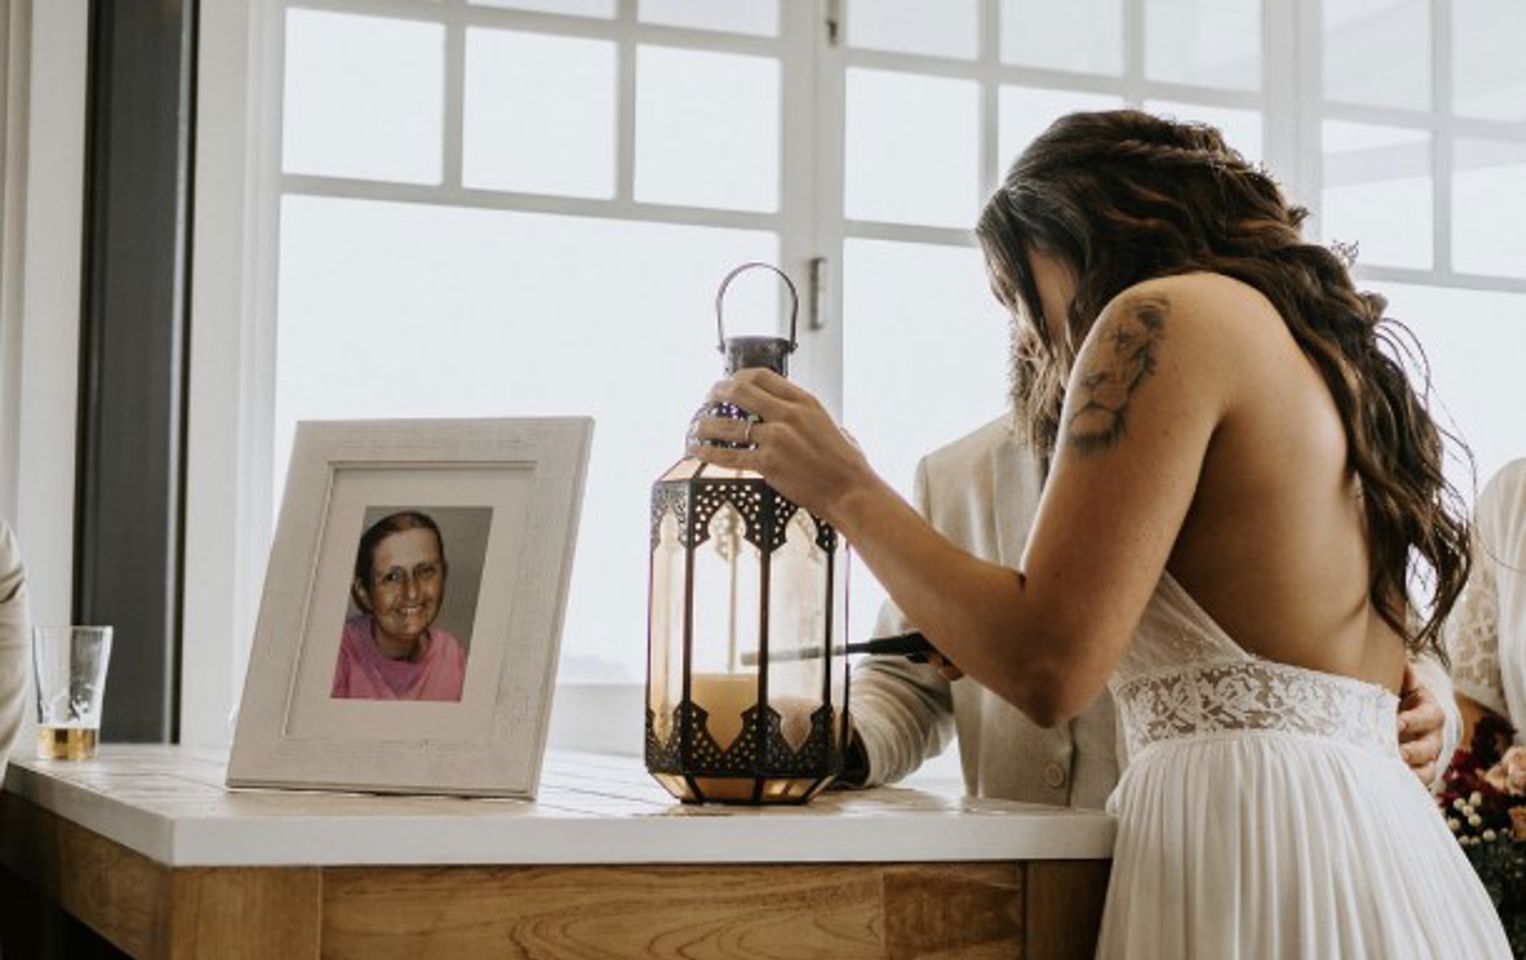 Stephanie at her wedding lighting a candle next to a portrait of her mother